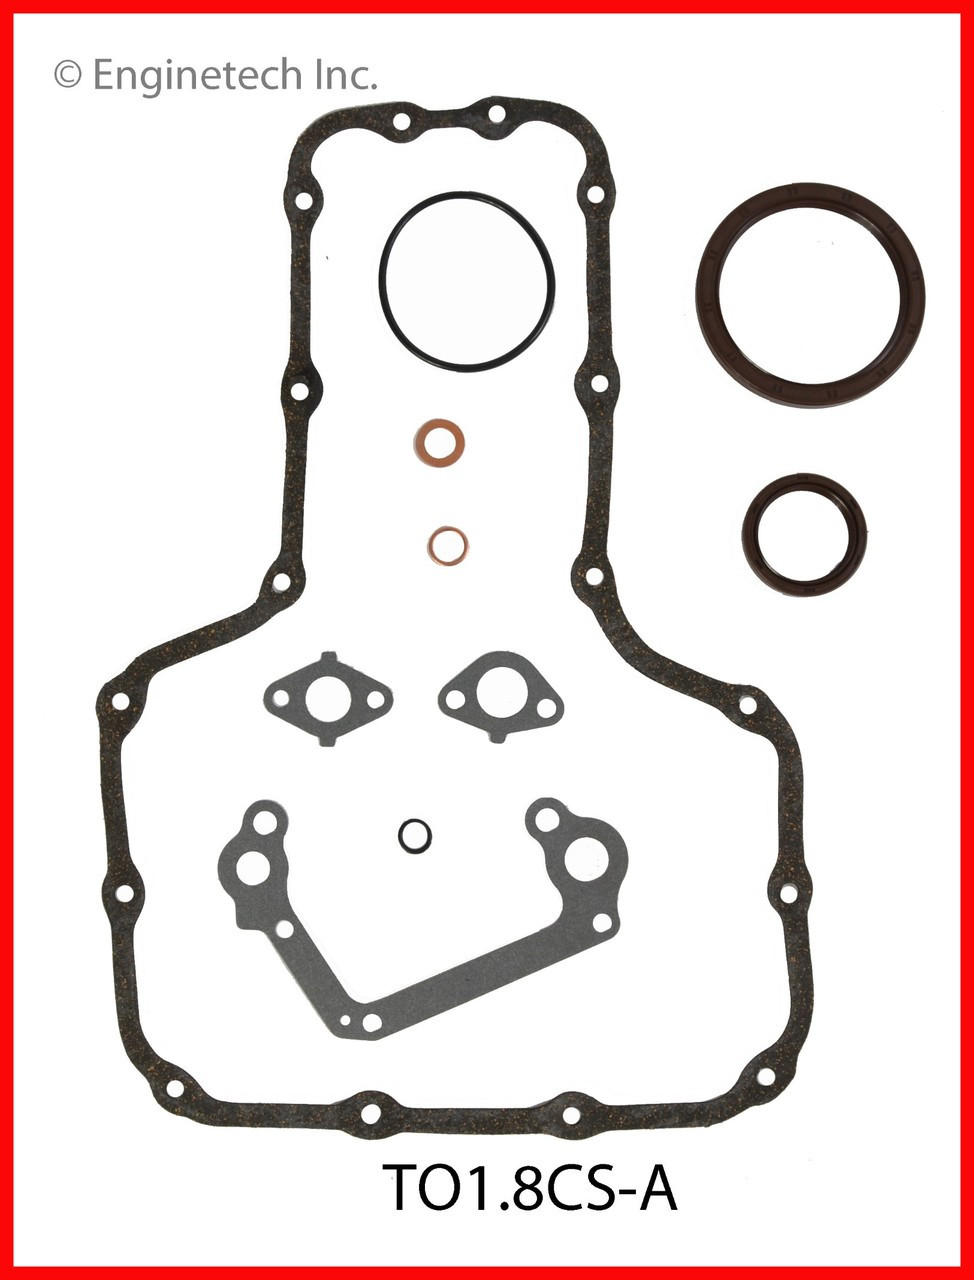 2005 Toyota Corolla 1.8L Engine Lower Gasket Set TO1.8CS-A -24